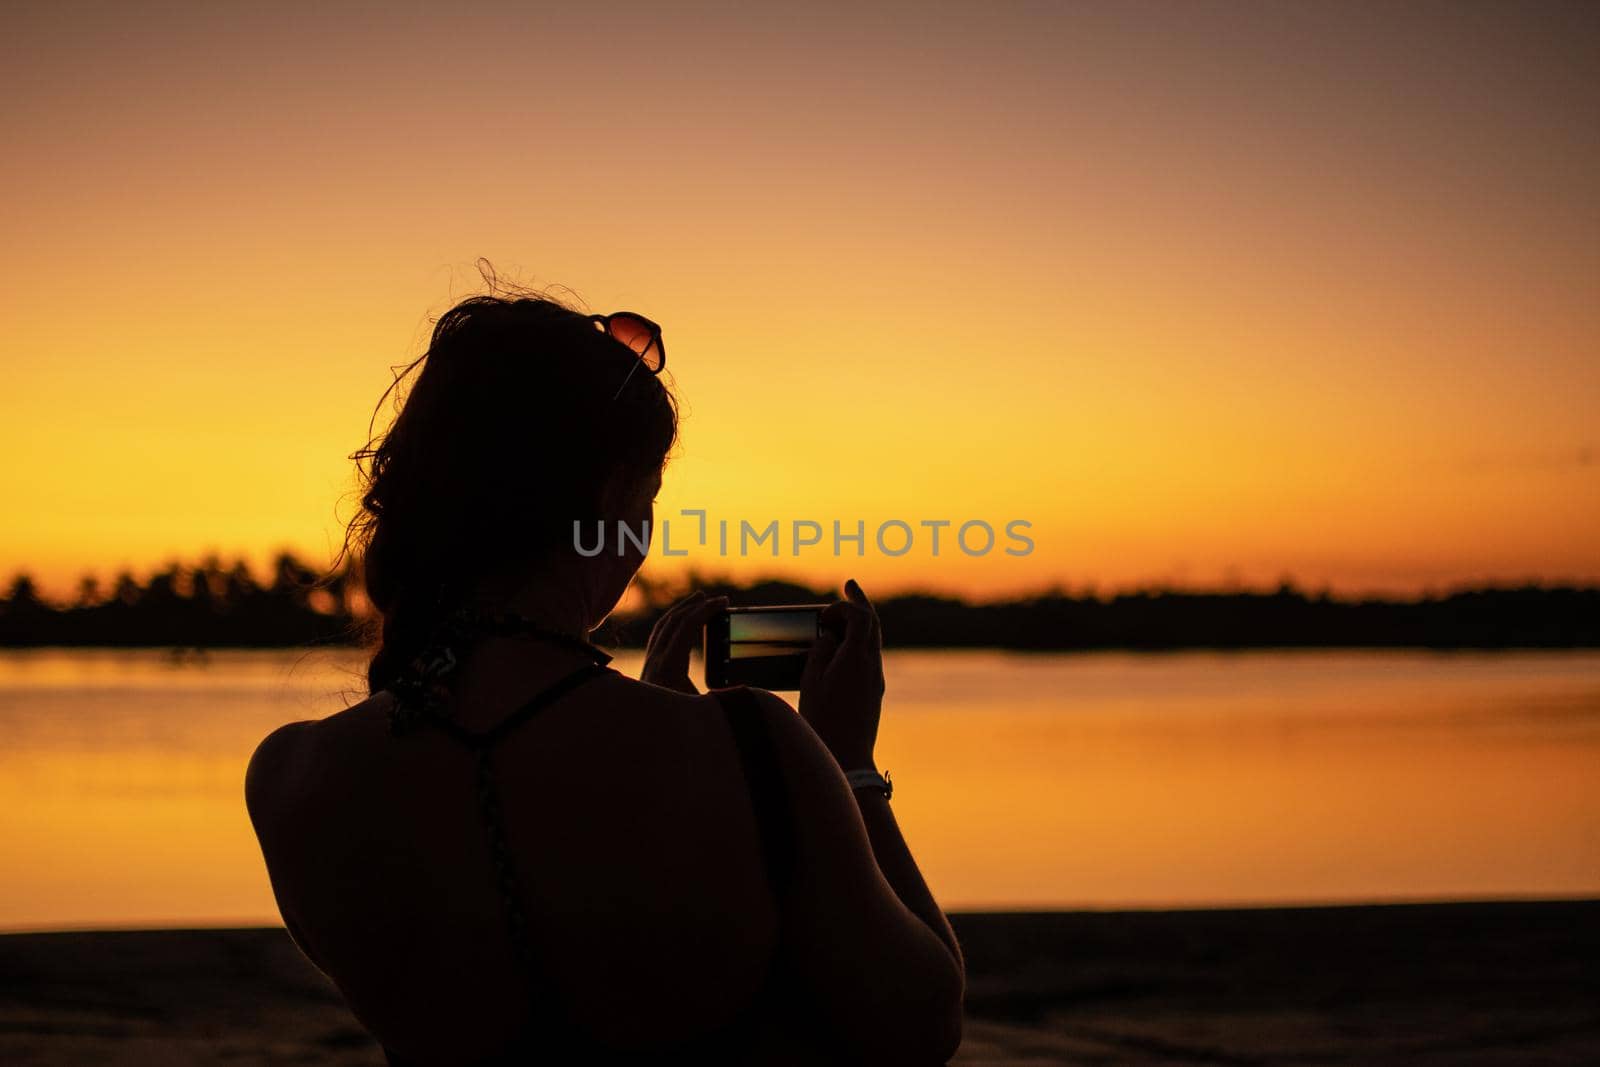 A woman takes a photo of the bright orange sunset, Ngwesaung, Myanmar by arvidnorberg